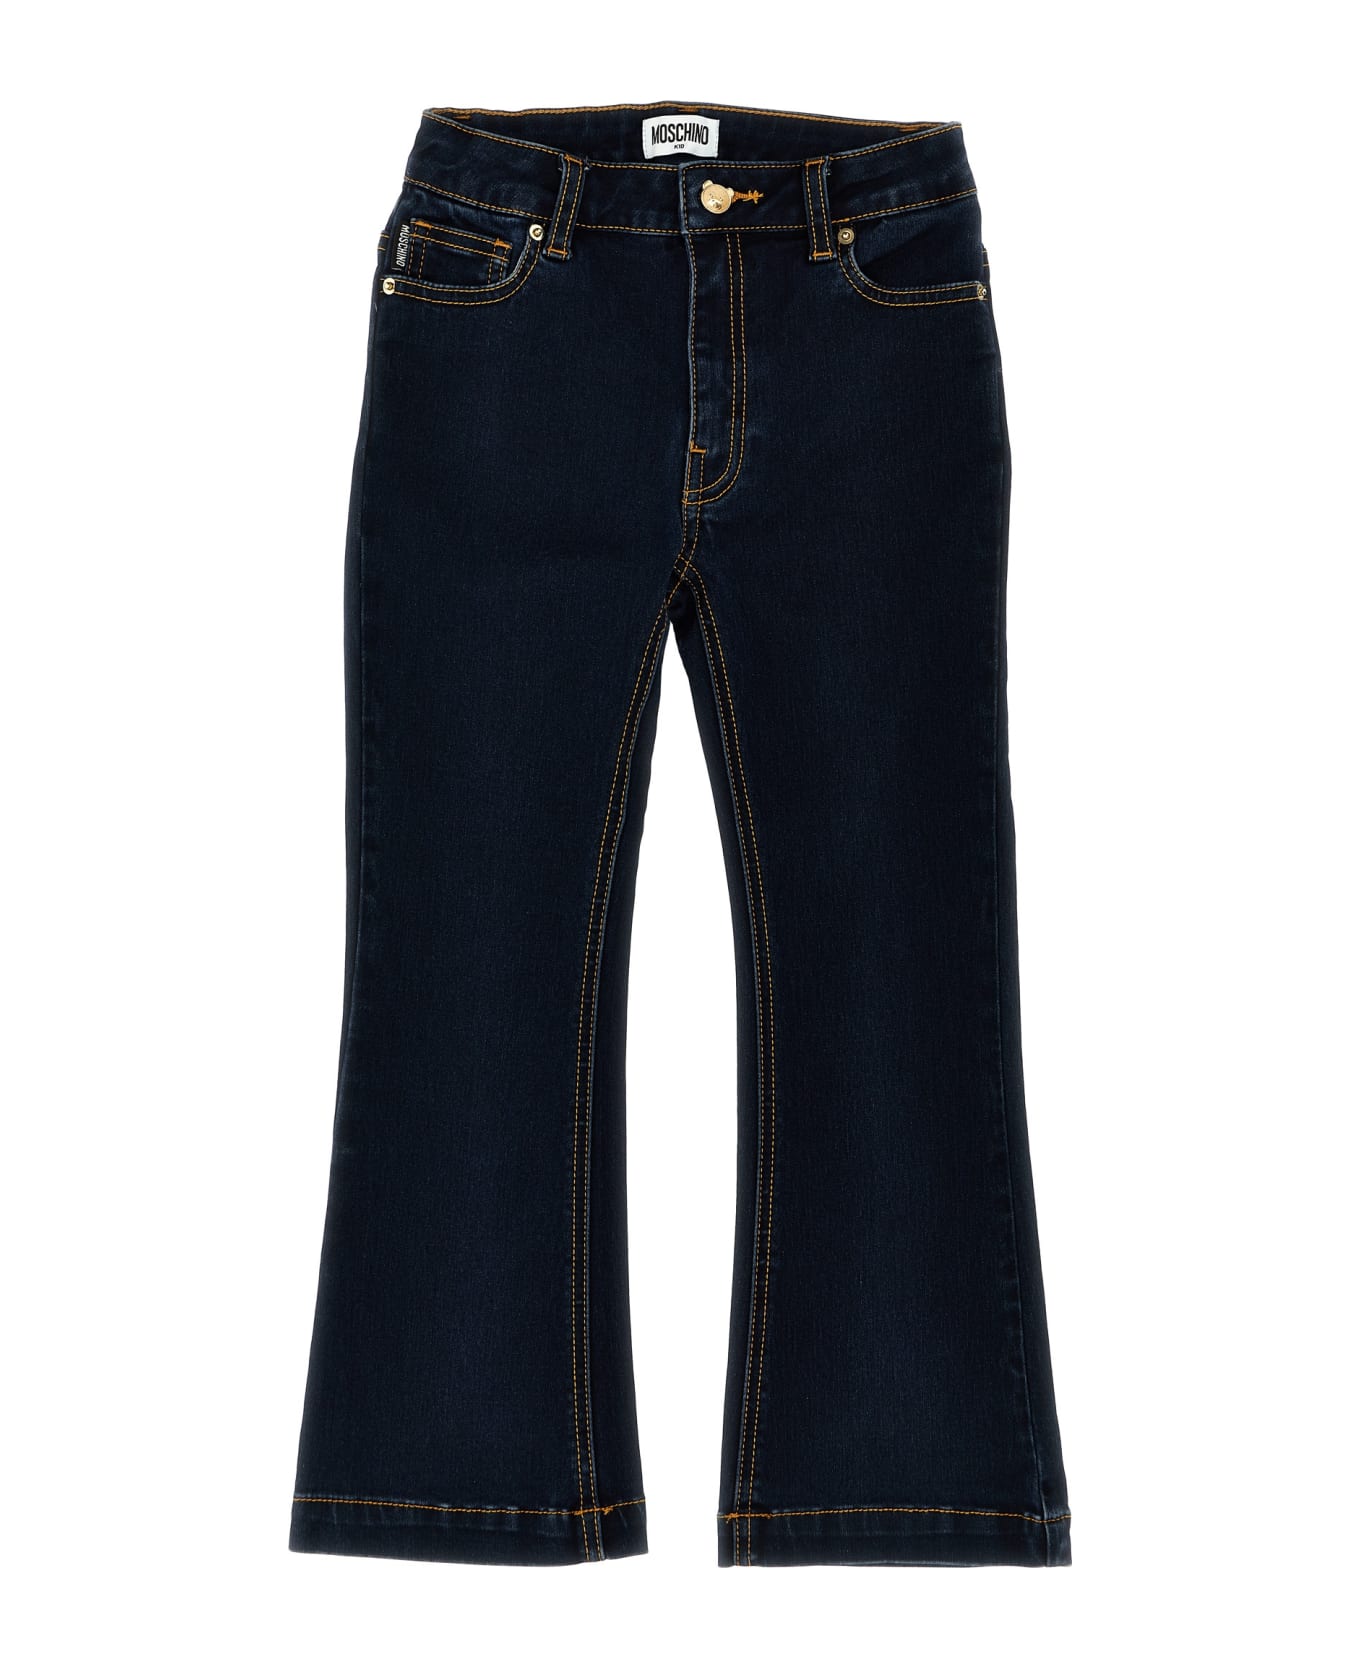 Moschino 'toy' Jeans - Blue